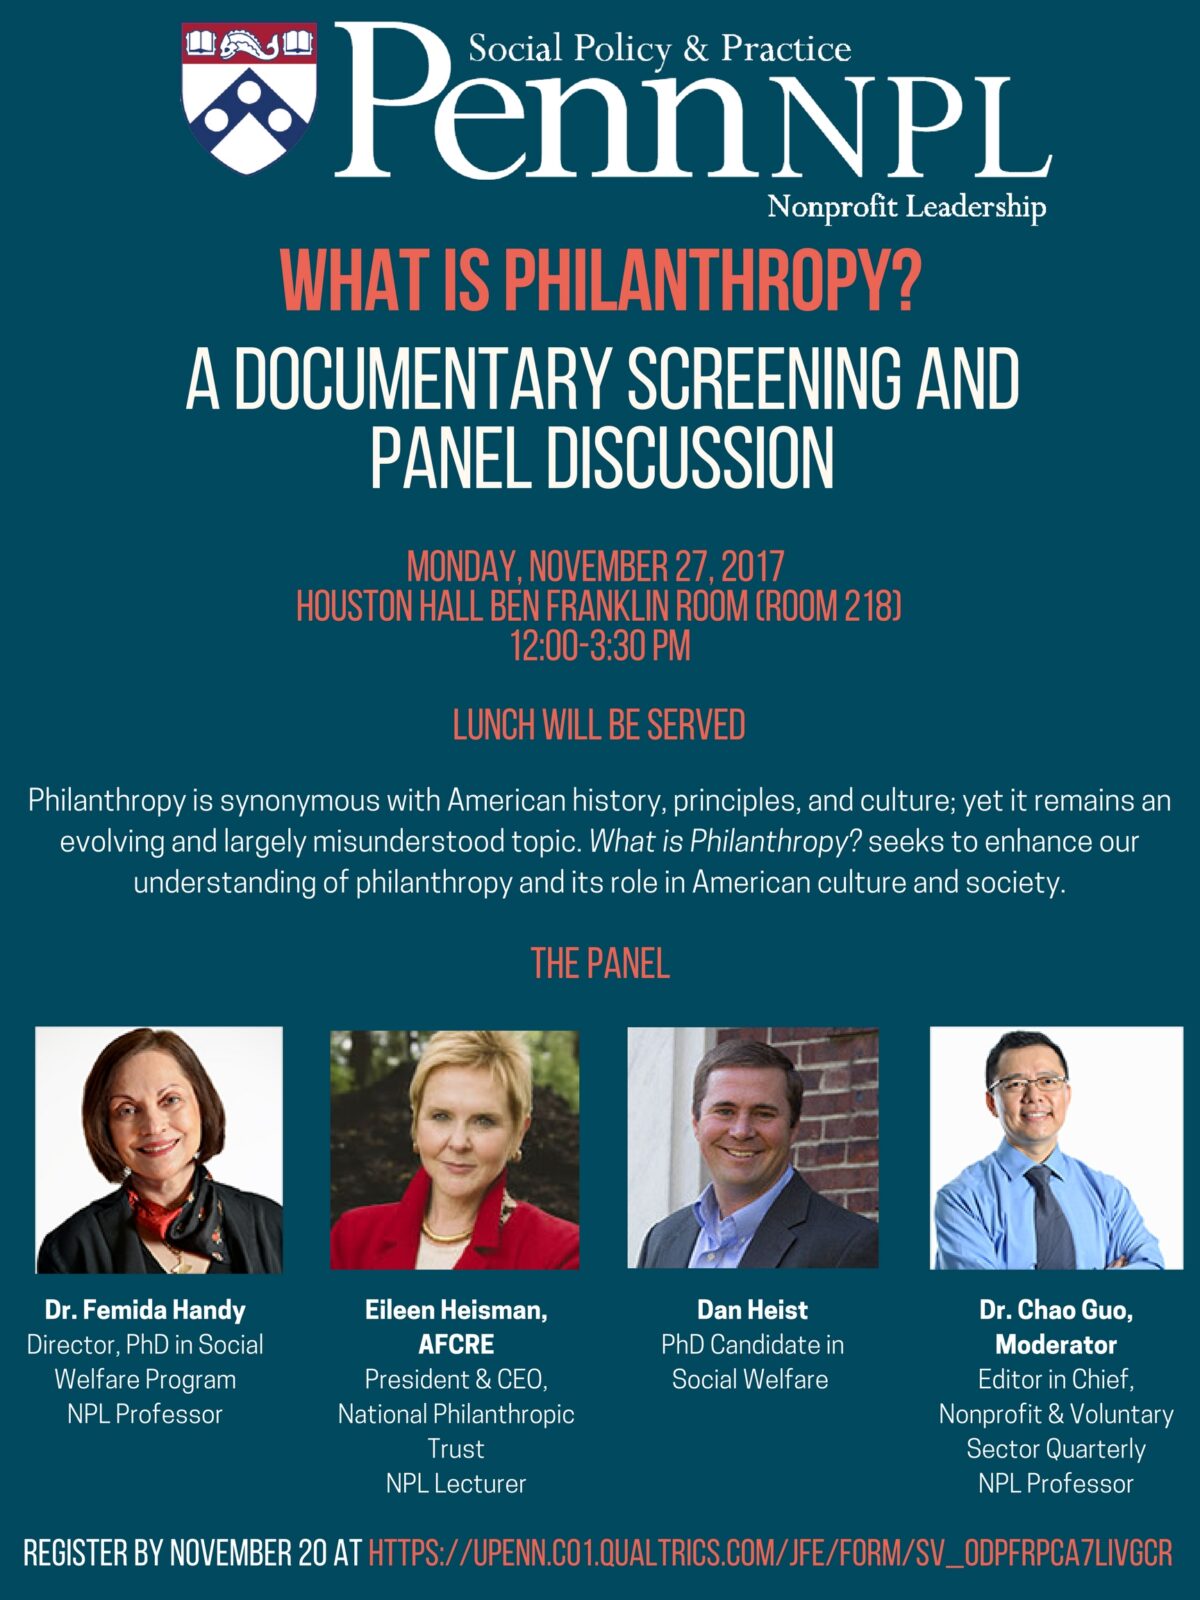 Flier for event on "What is Philanthropy?"